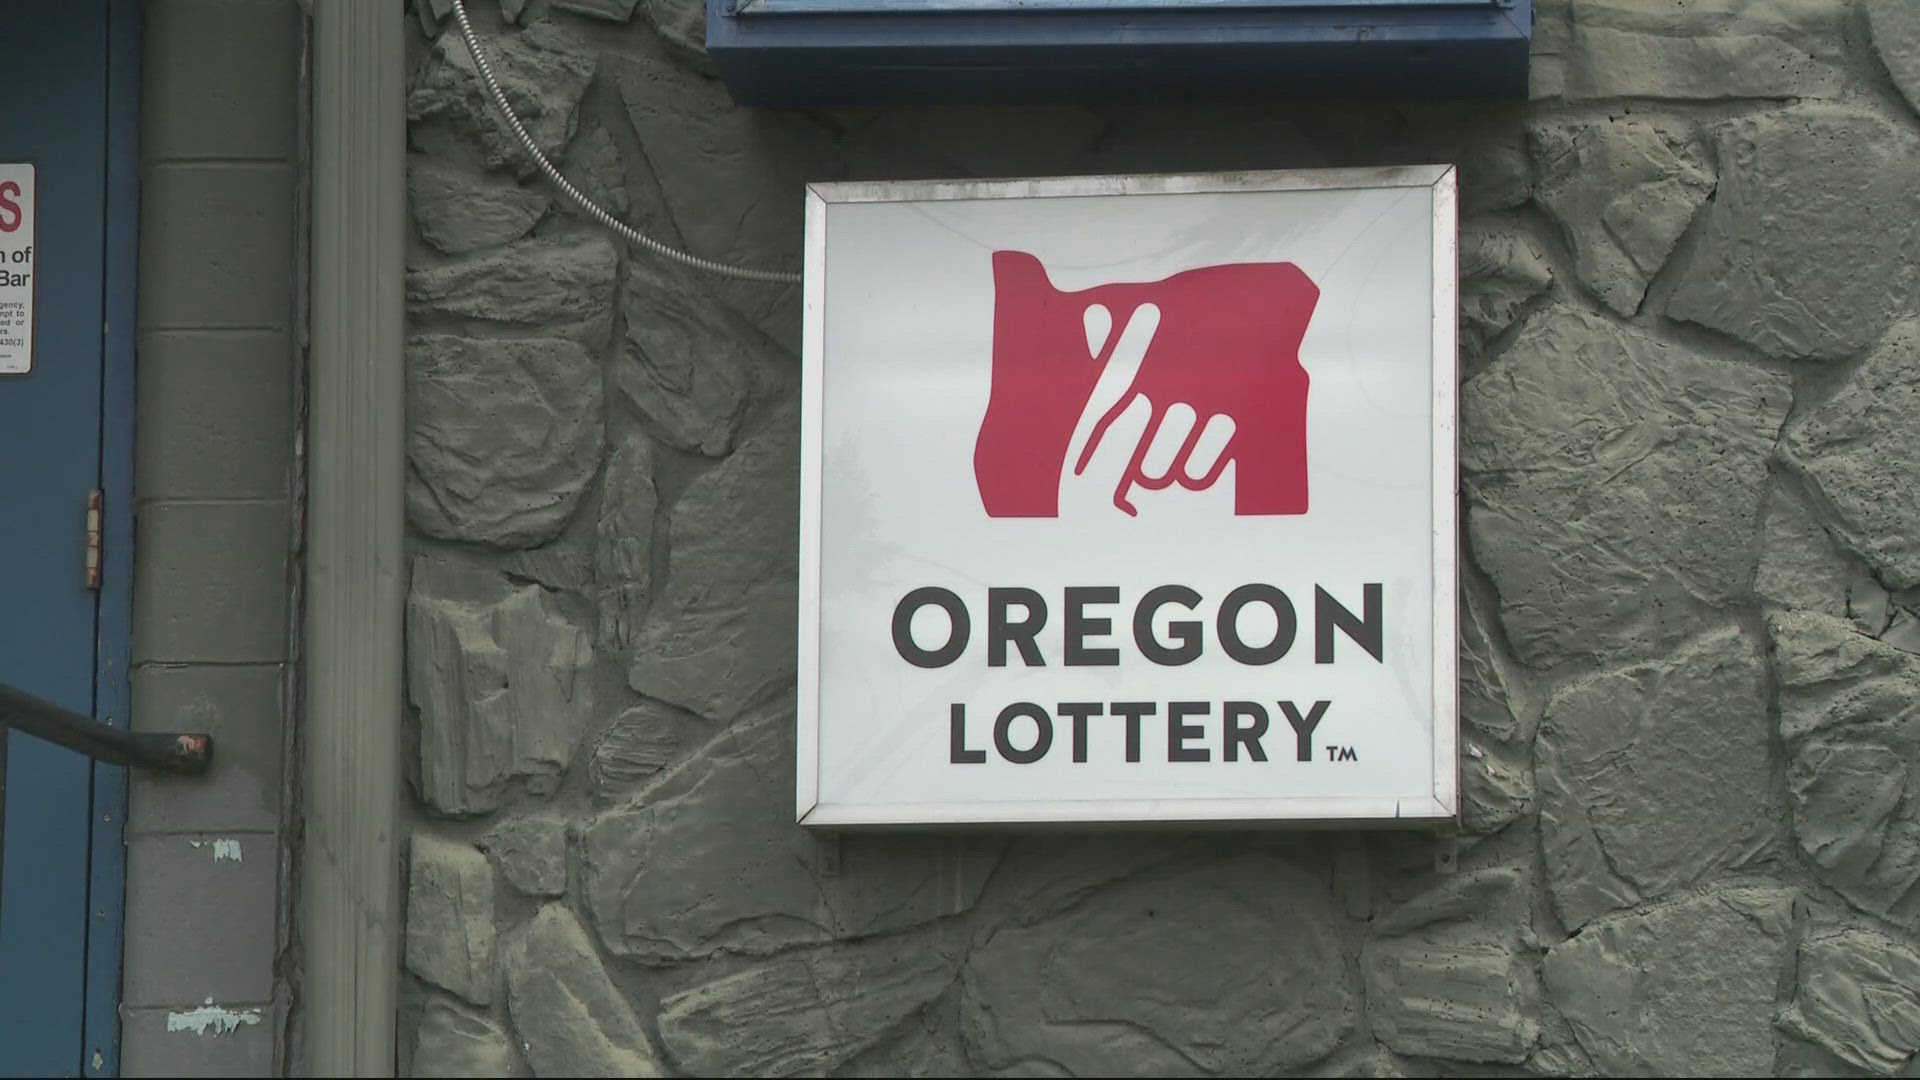 The Oregon Lottery issued a public warning about the scam texts this week. There have been many cases of scammers impersonating recent lottery jackpot winners.